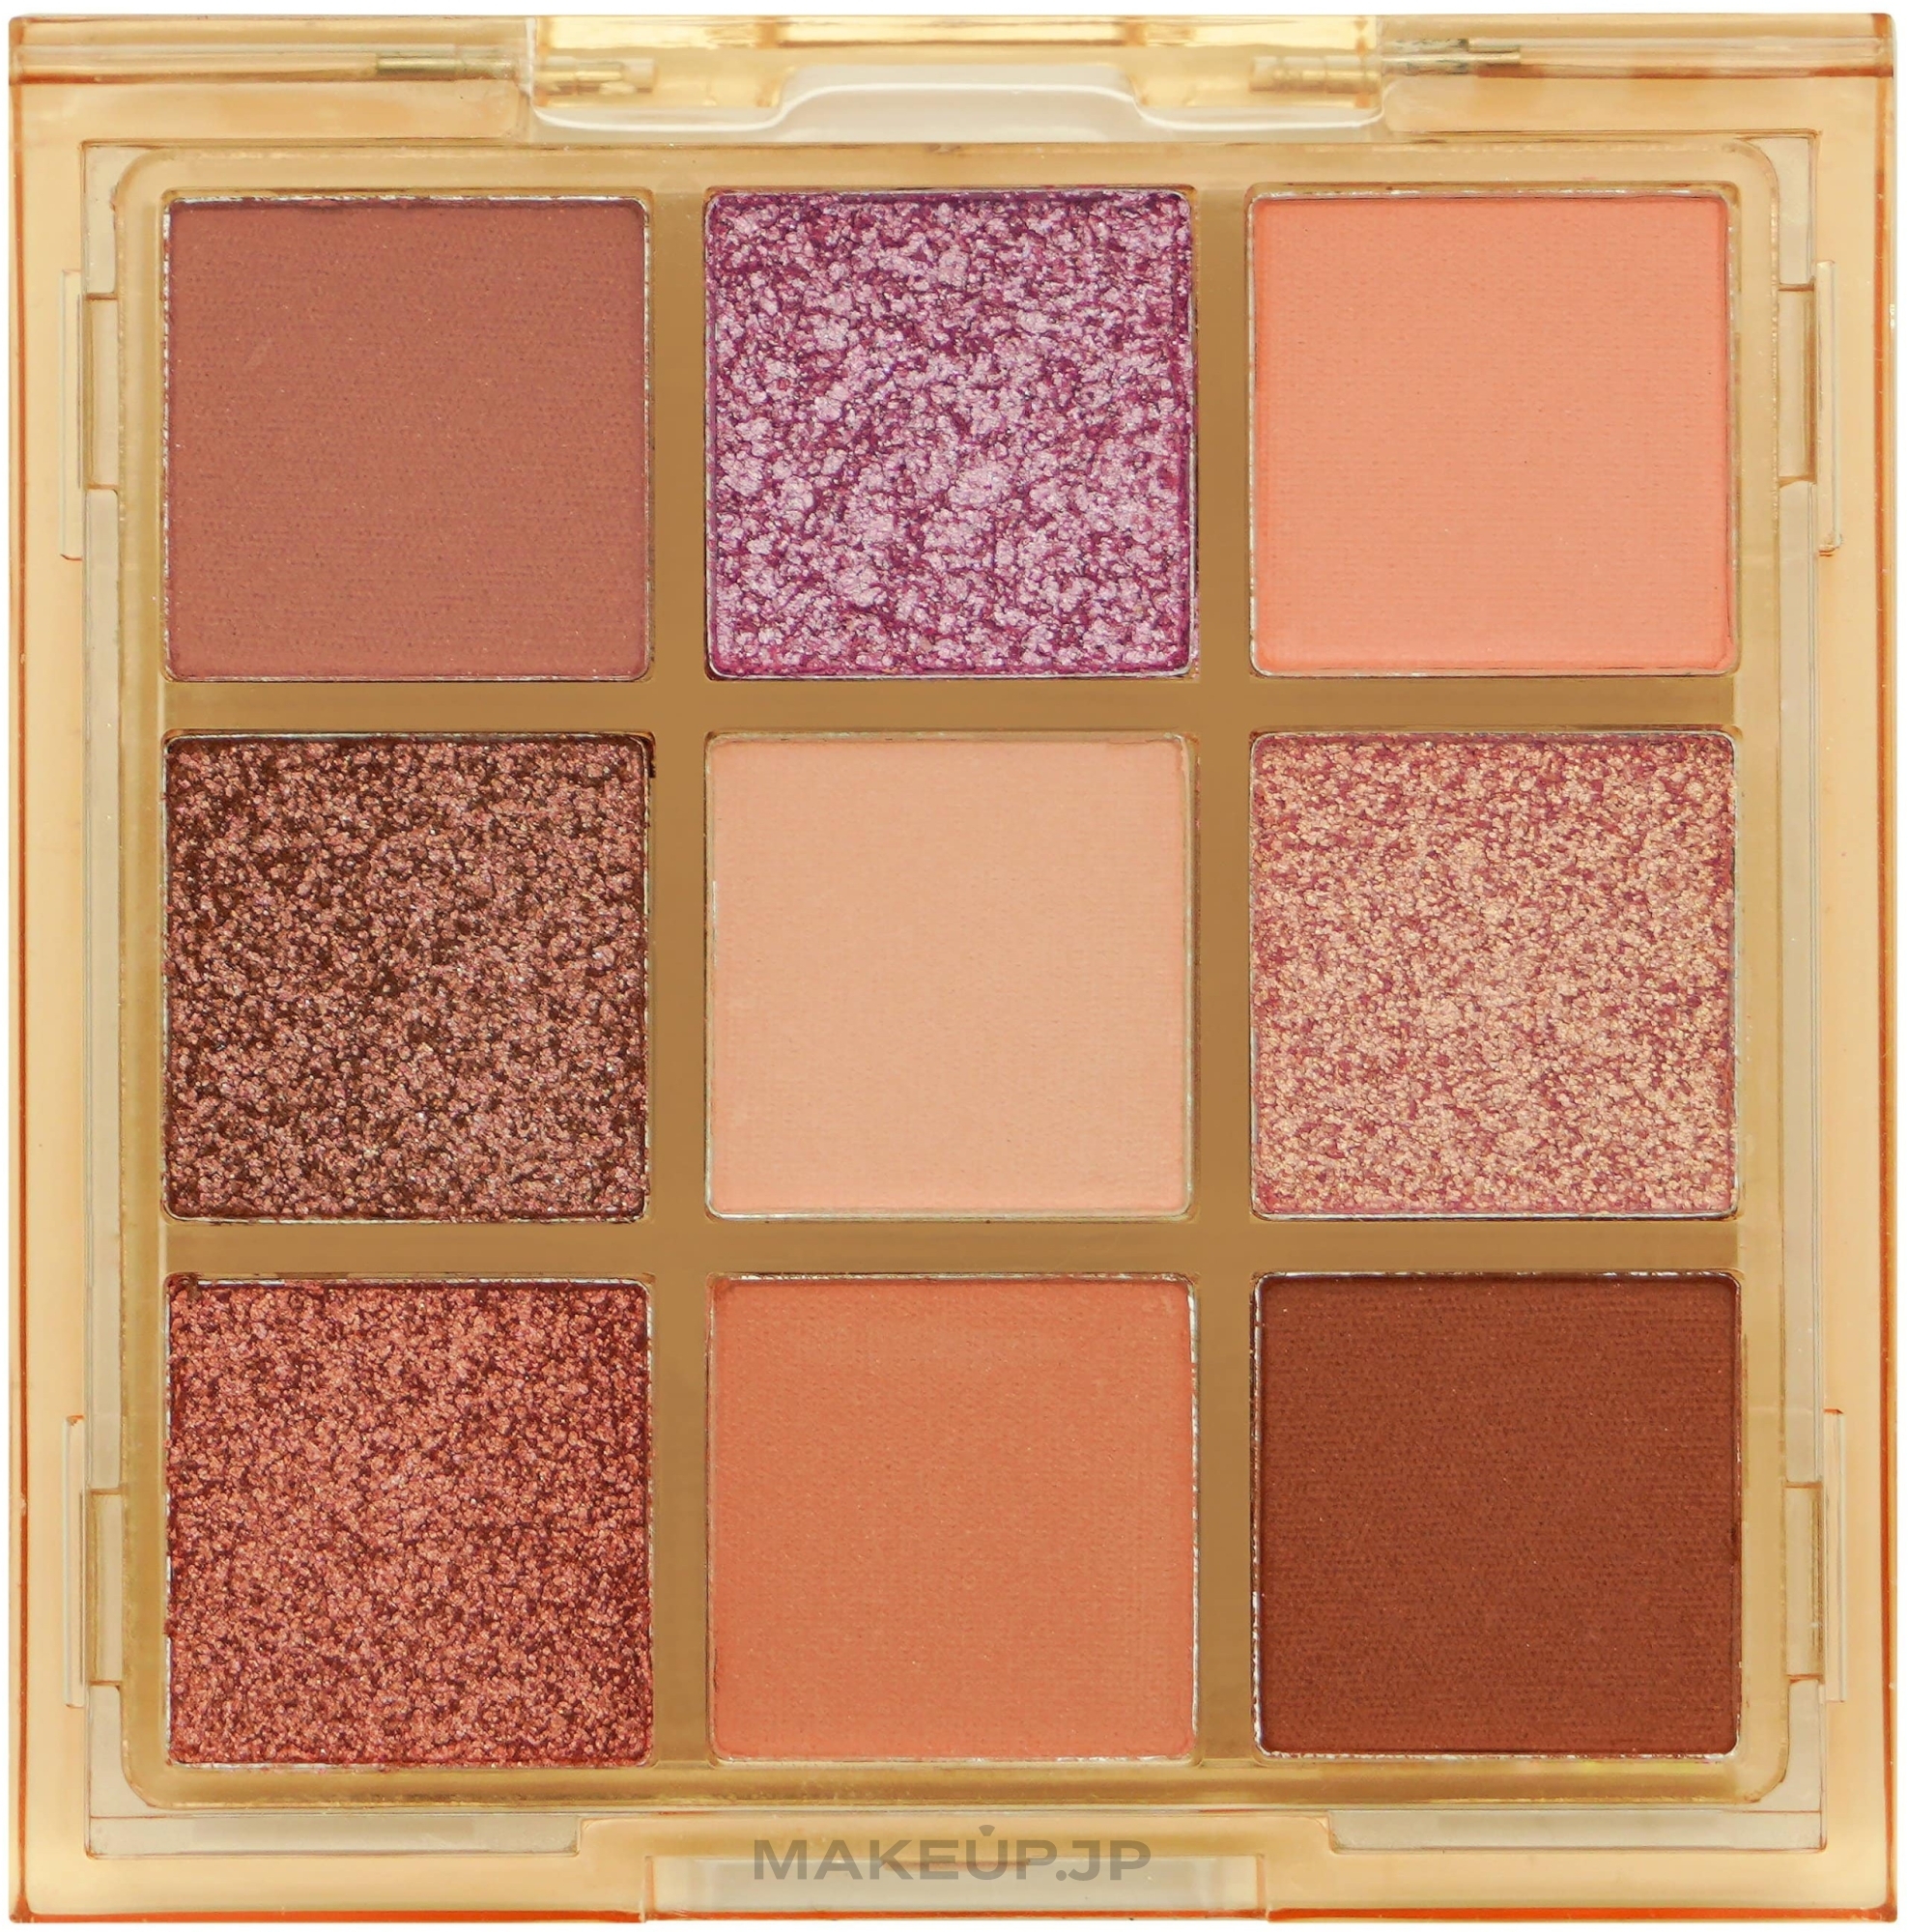 Eyeshadow Palette - W7 Bare All! Pressed Pigment Palette — photo Exposed